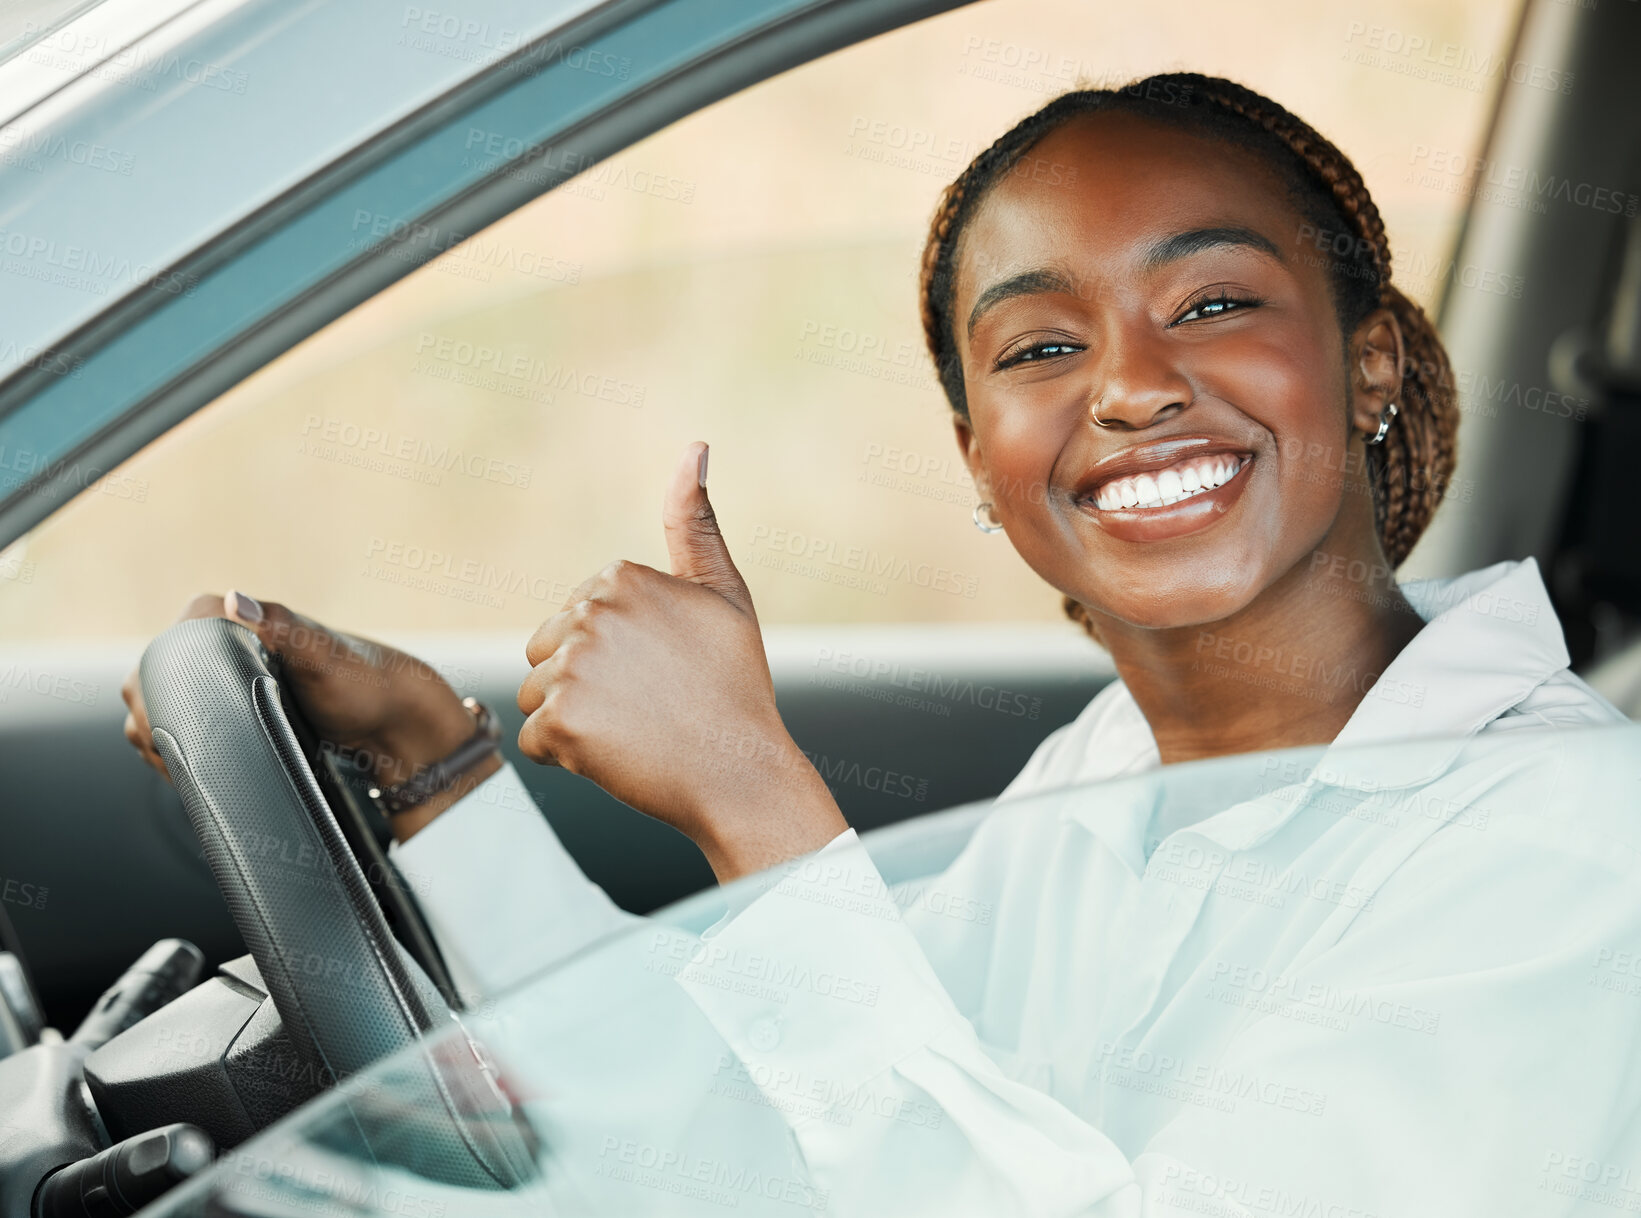 Buy stock photo New car, smile or portrait of black woman with thumbs up, yes or thank you for vehicle finance or loan success. Motor, deal or happy driver ready for travel, transport or auto insurance agreement